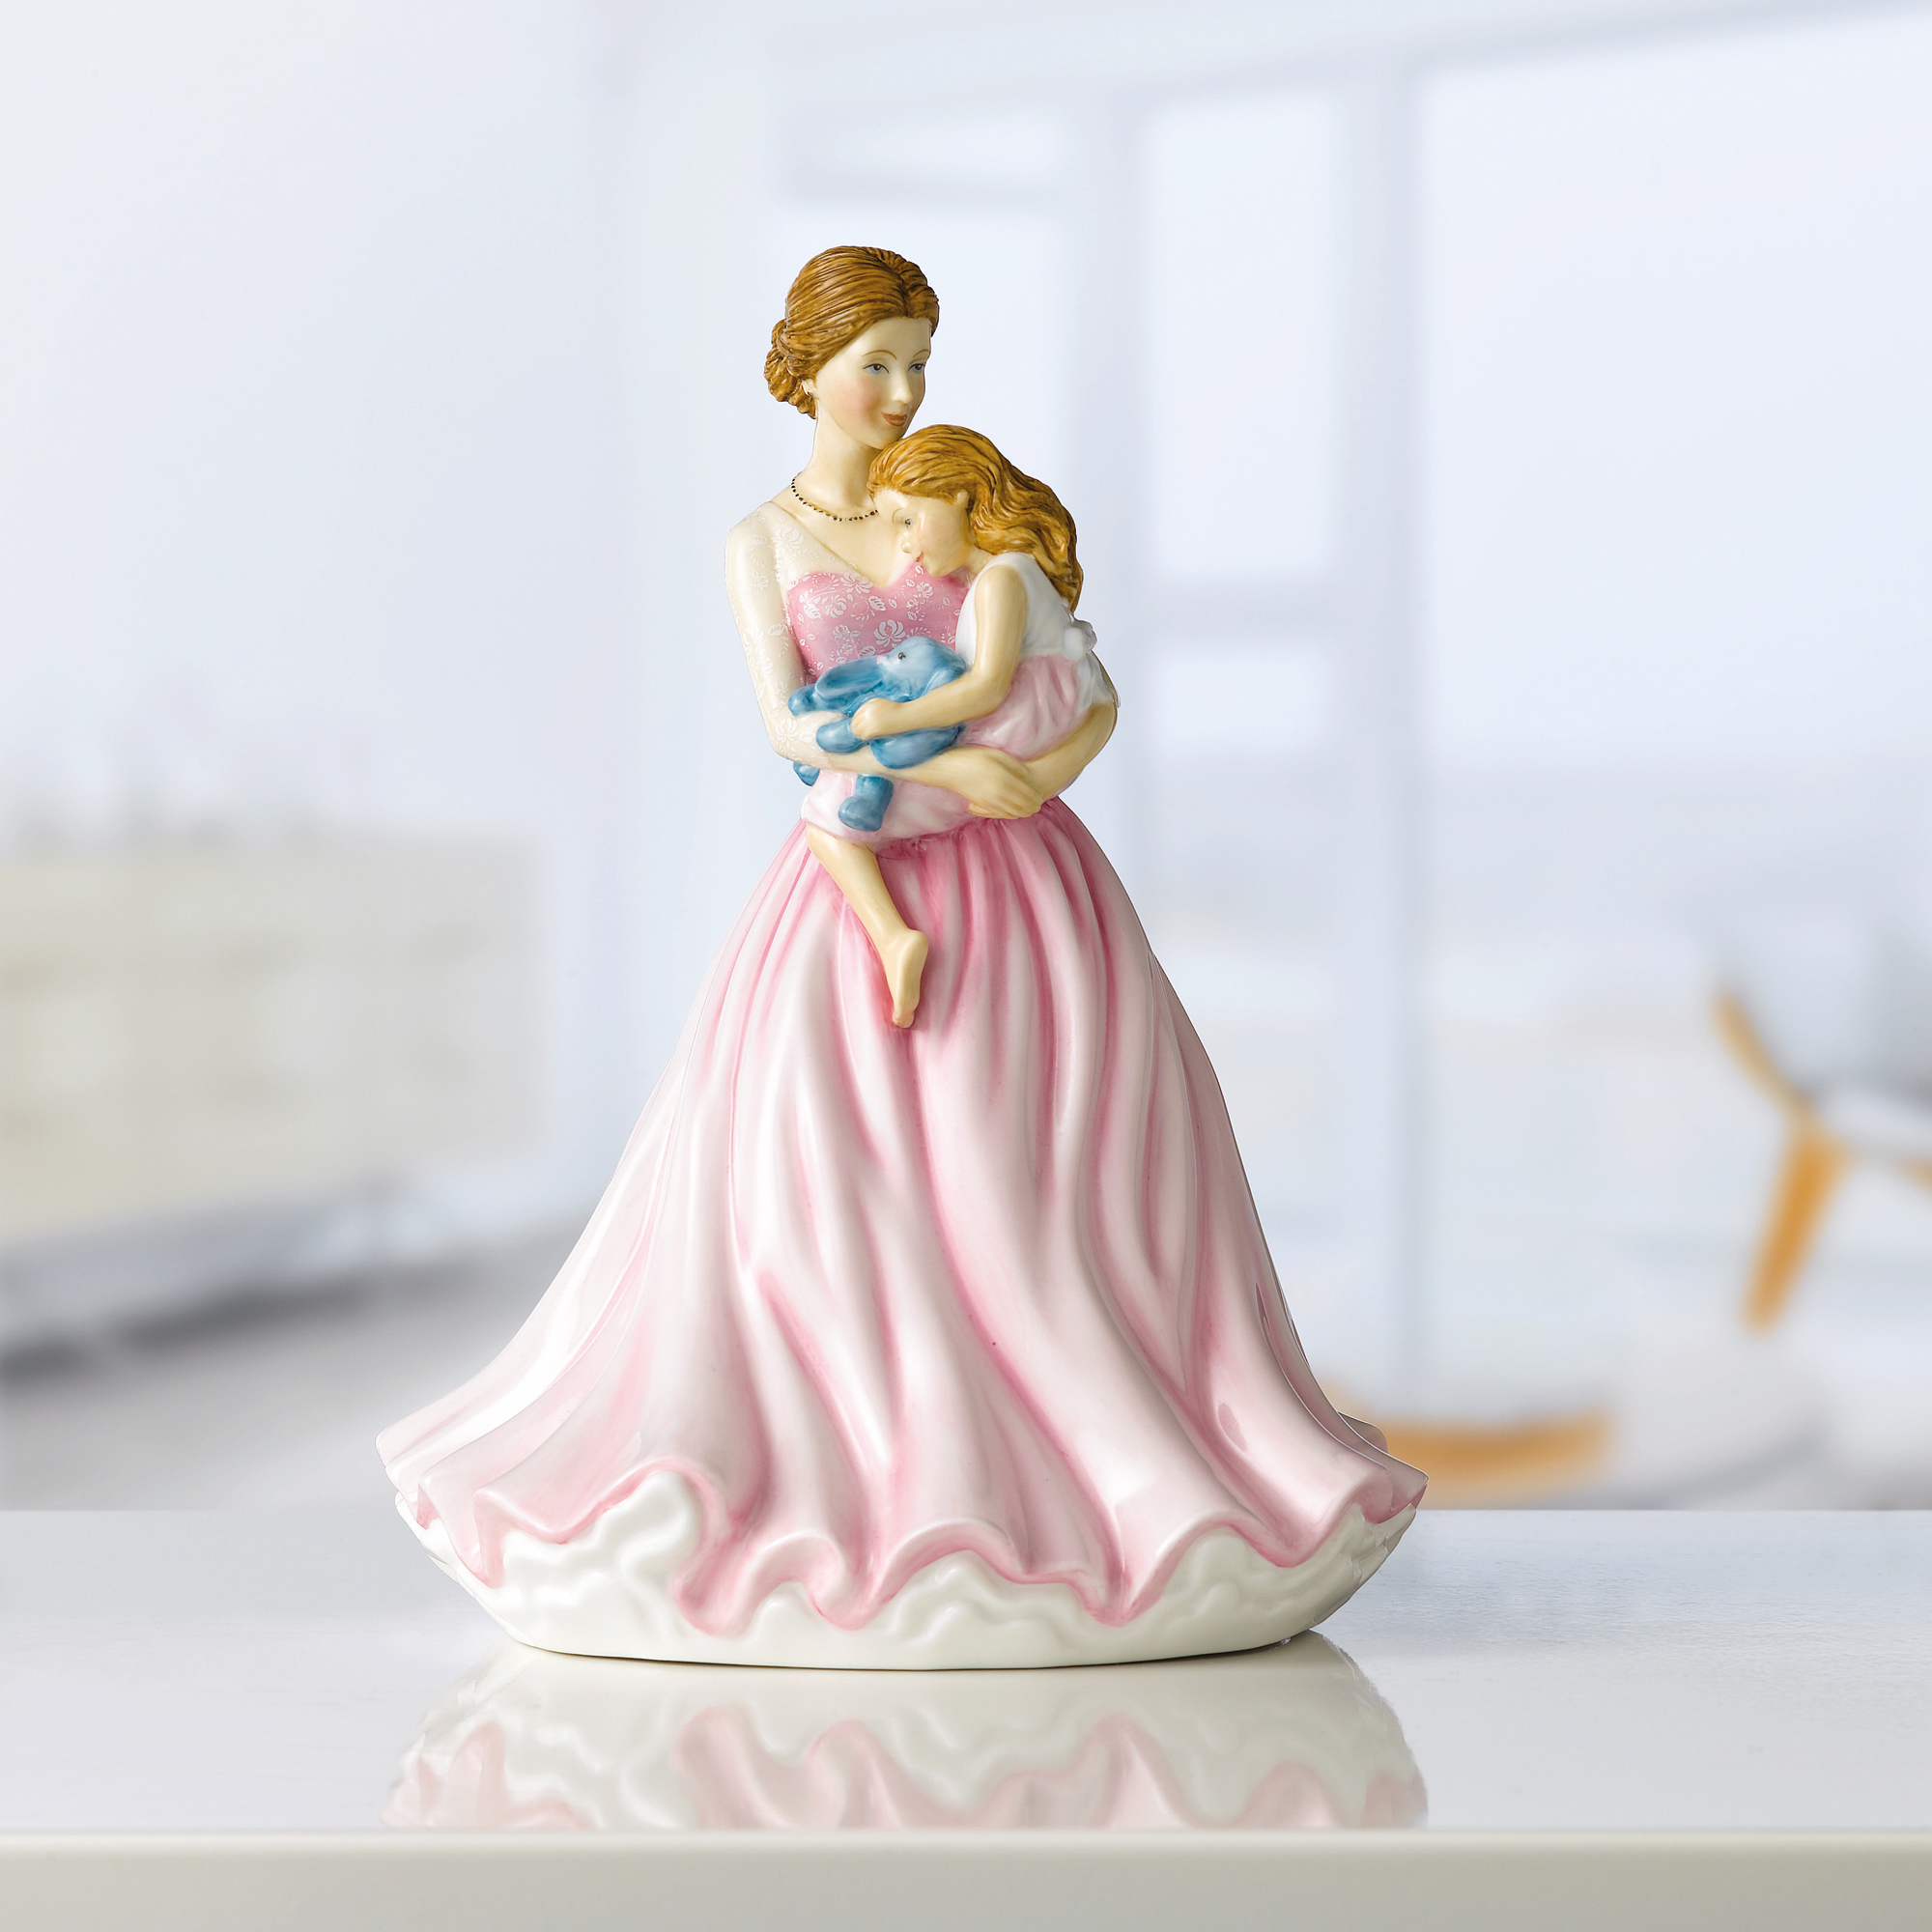 Mother's Angel HN5909 2019 Mother's Day Figure of the Year Royal Doulton Figurine